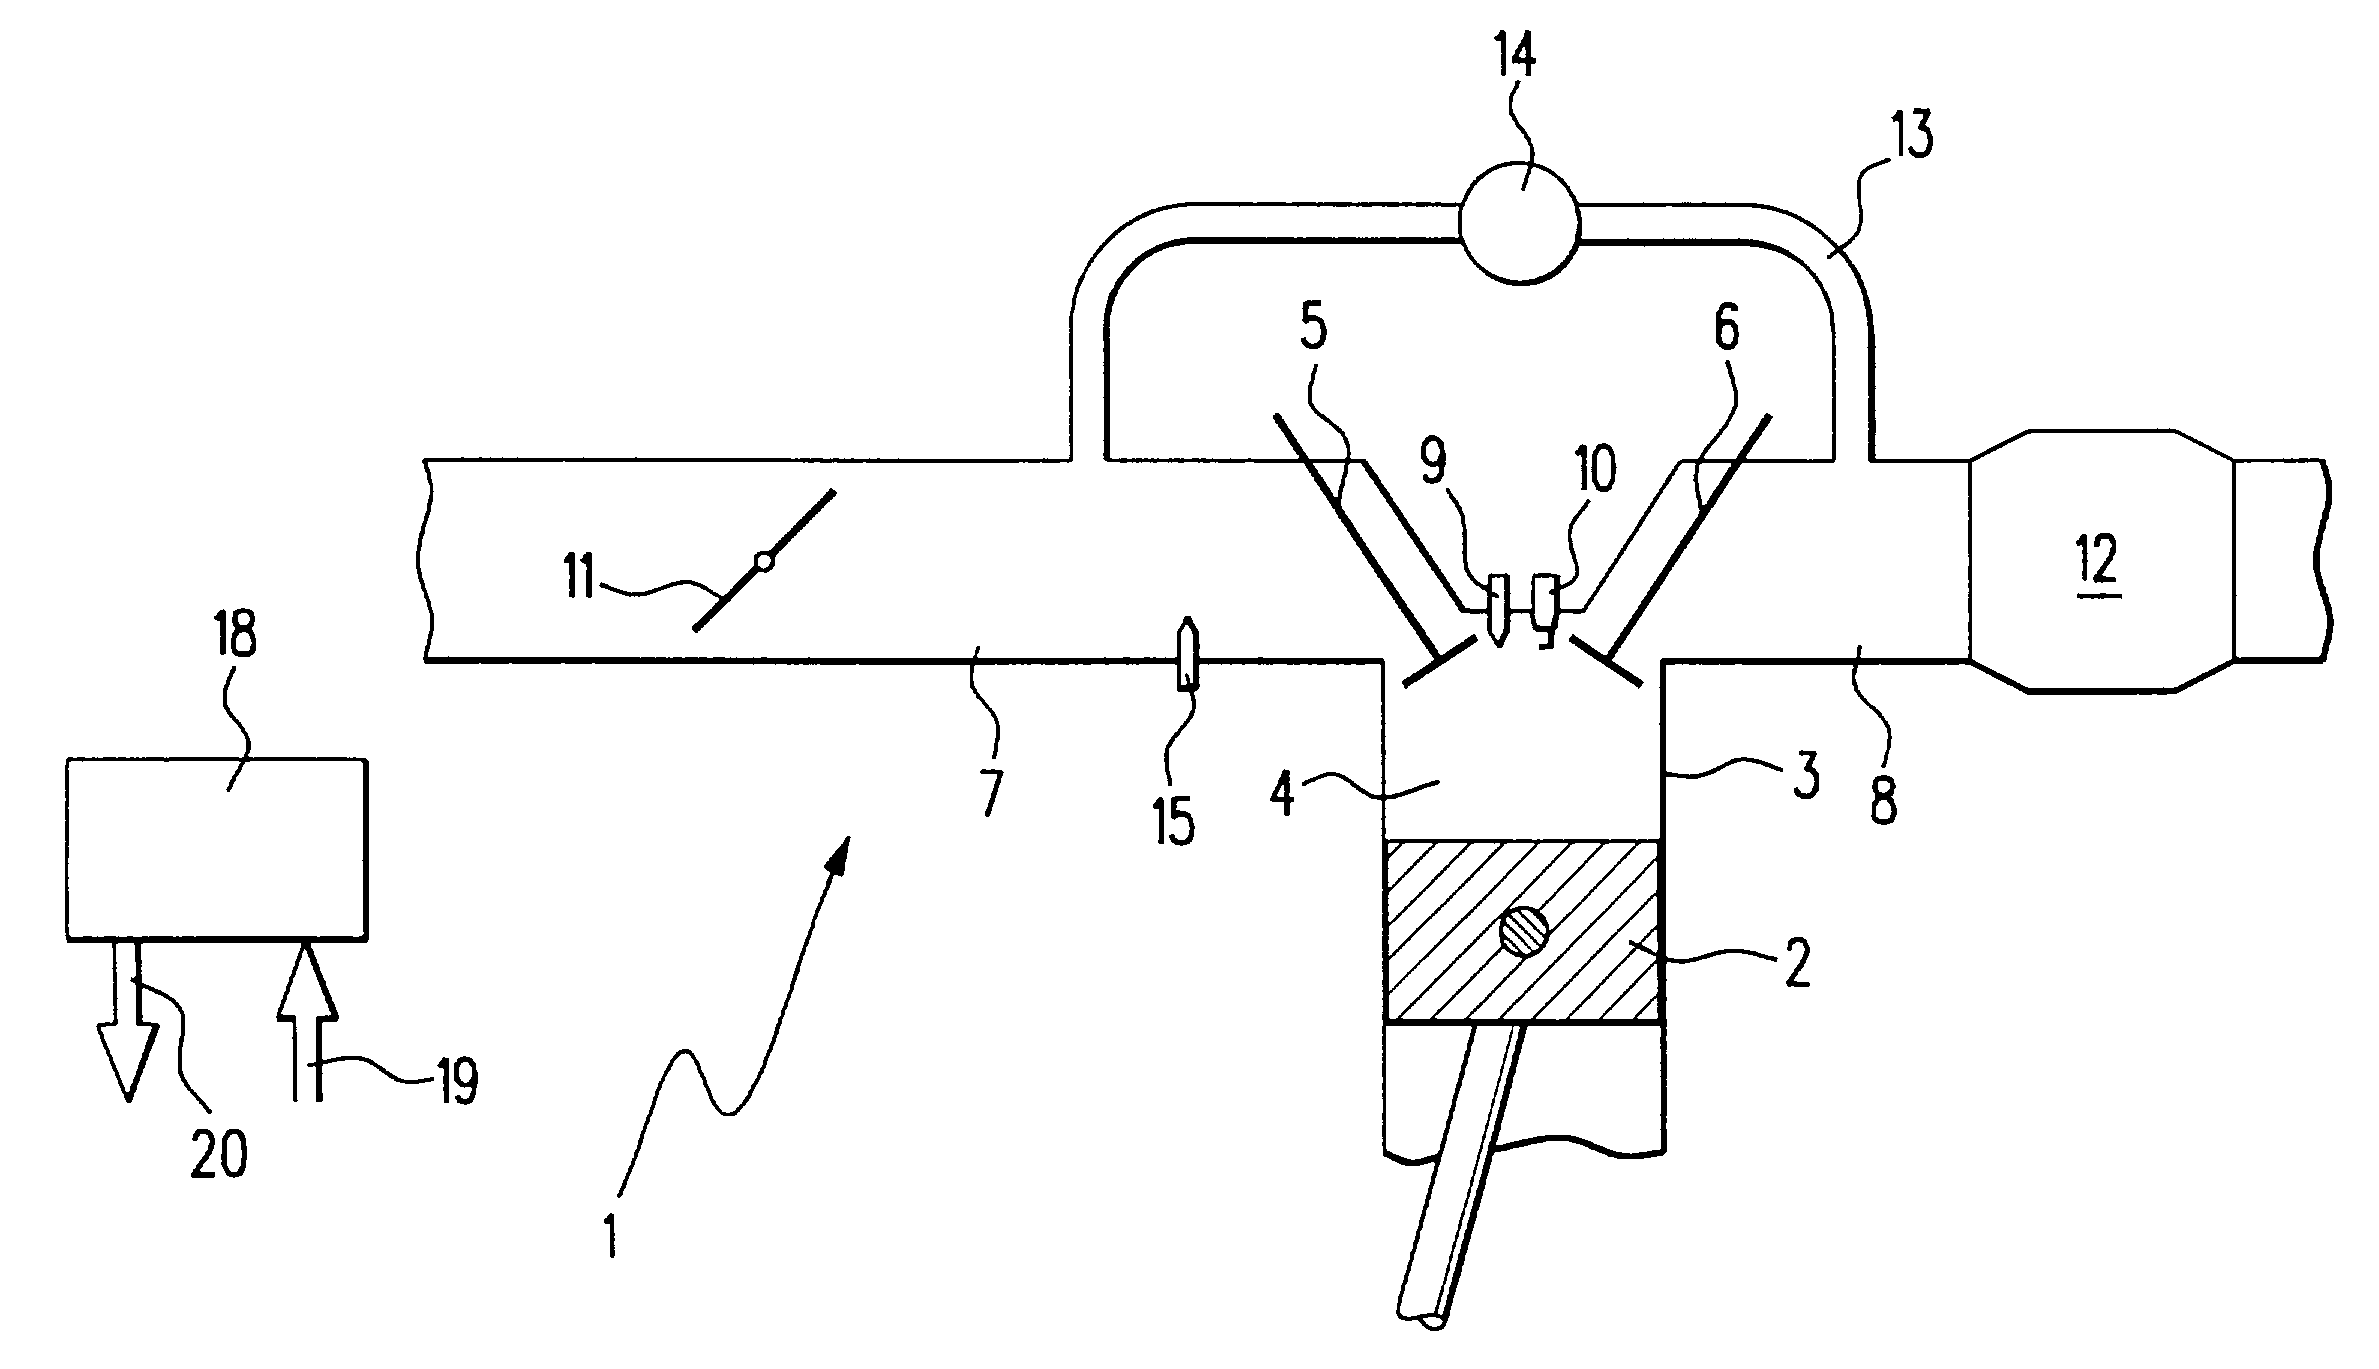 Fuel injection system for internal combustion engines with gasoline direct injection, which includes optional injection into the intake tube, and method for operating it